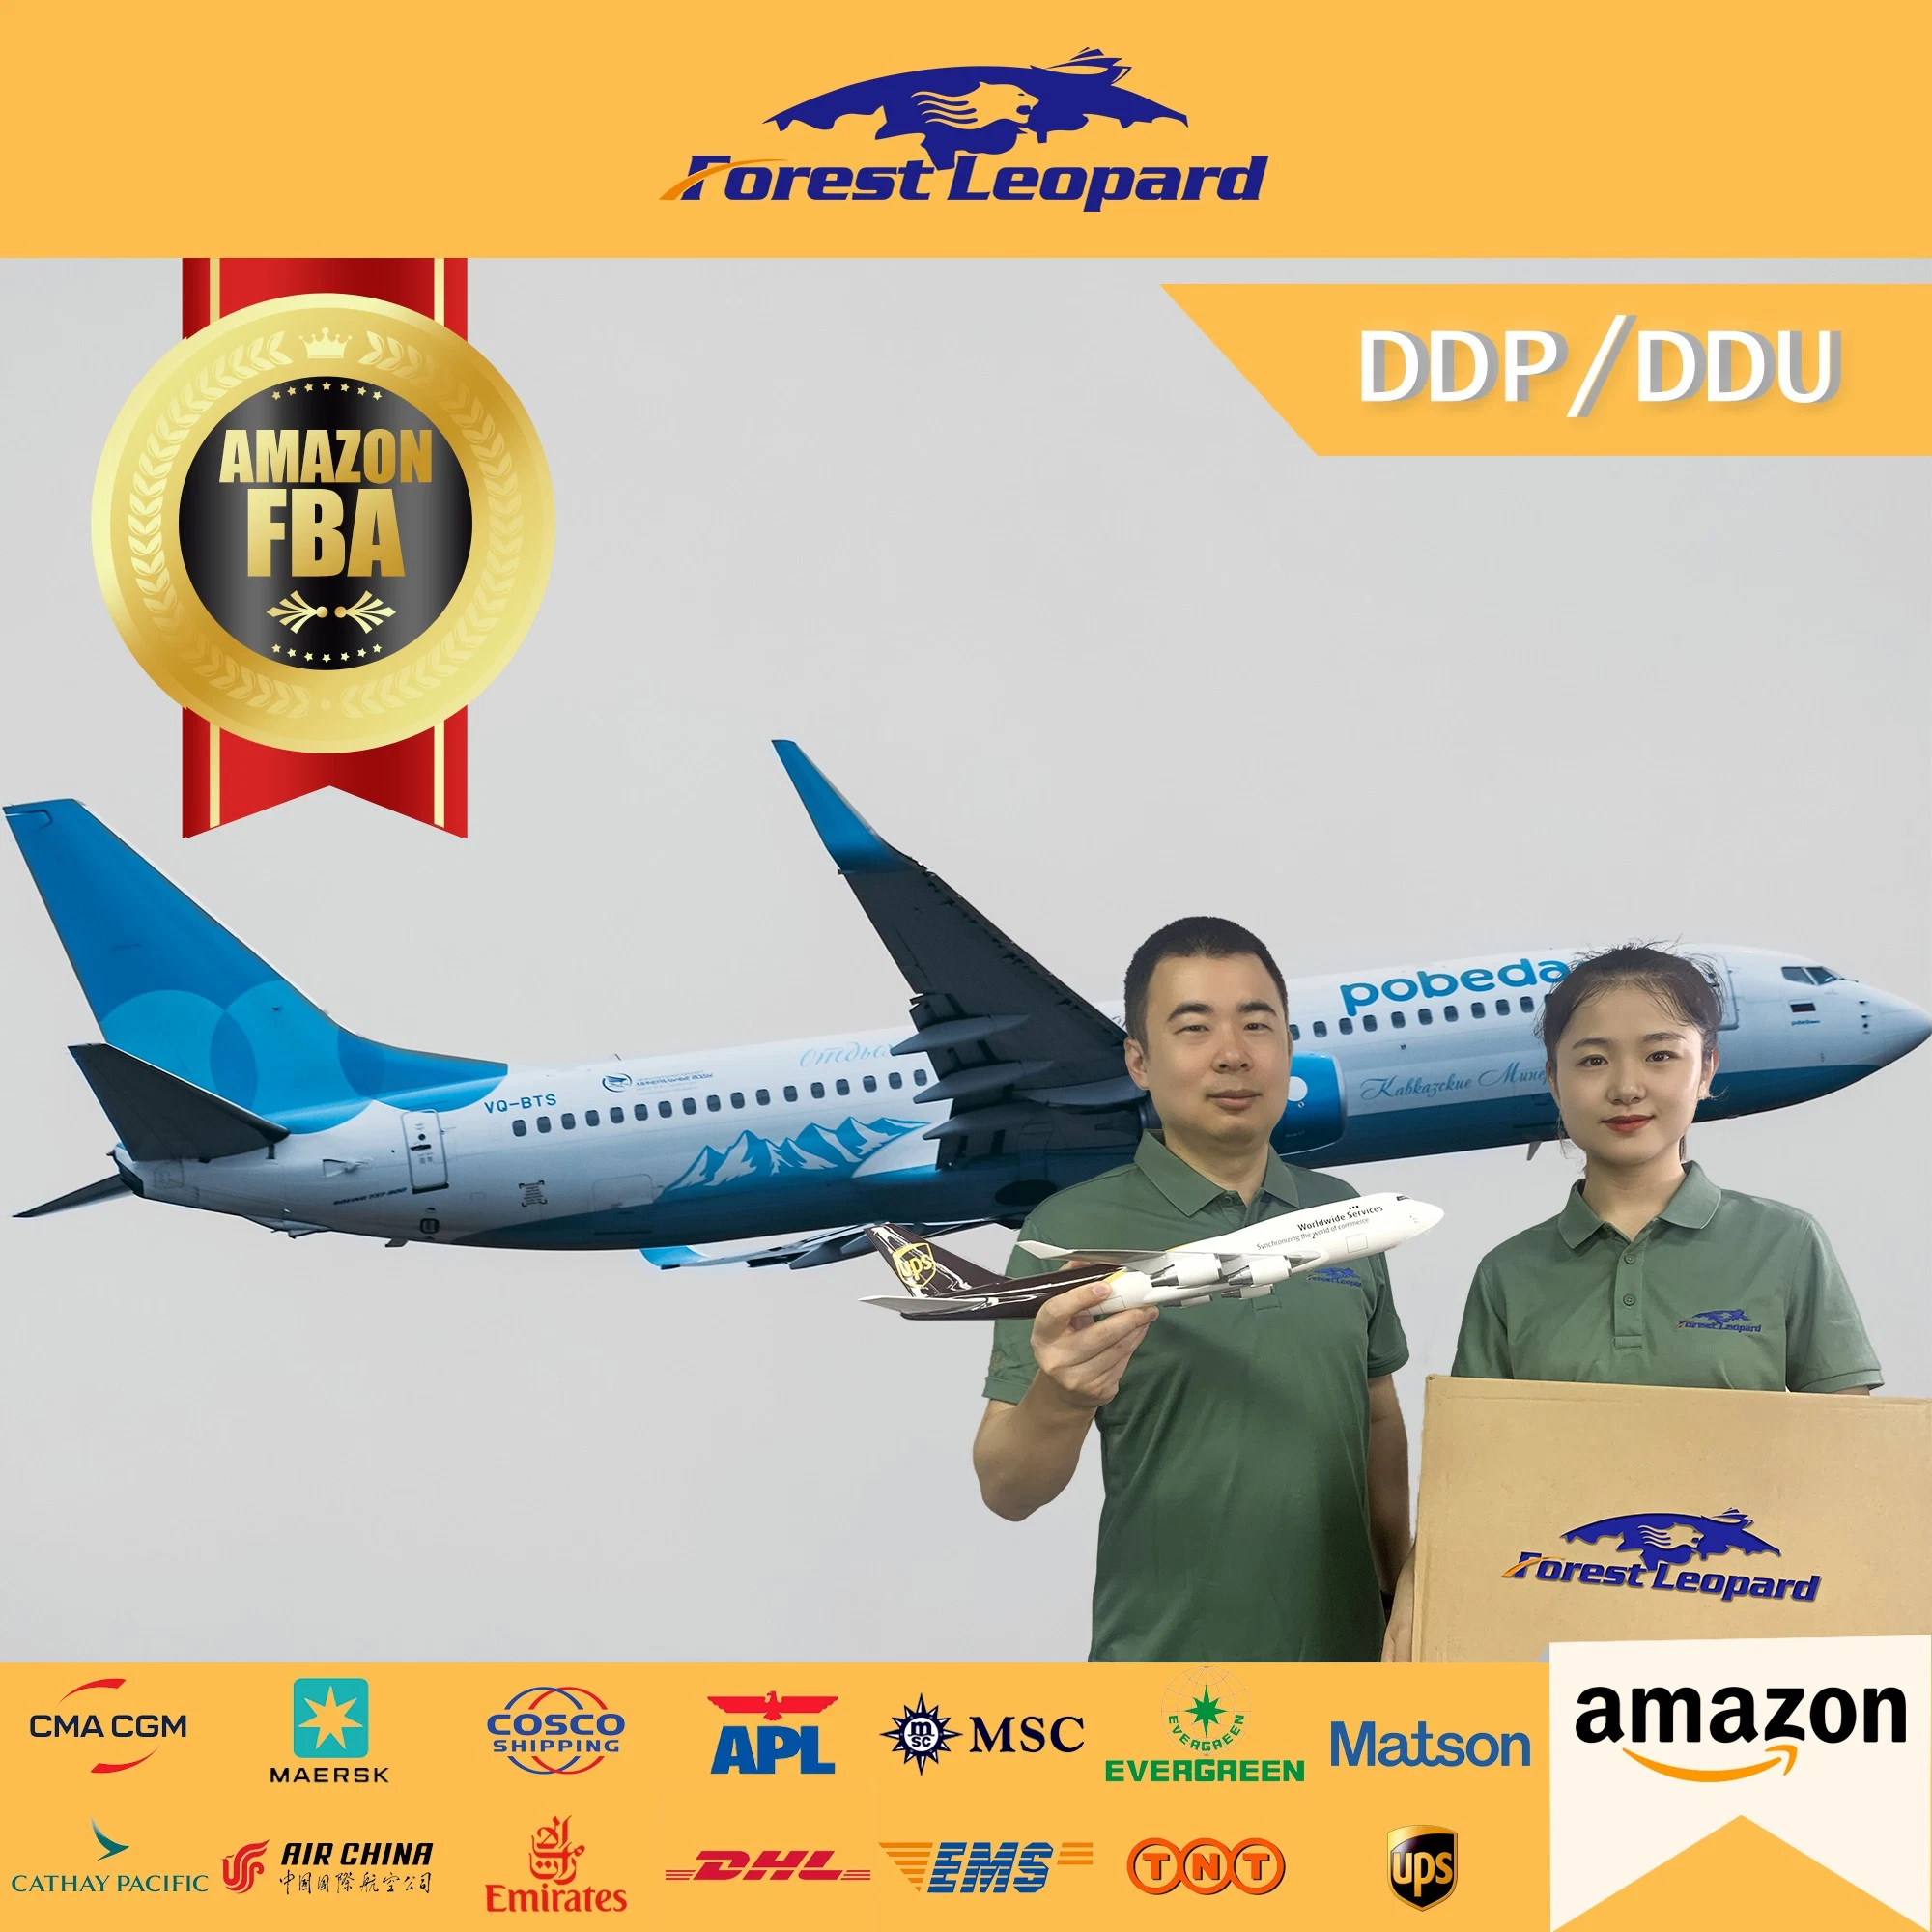 Shenzhen Freight Company International Air Shipping DHL Express From China Shipping to USA DDP/LCL